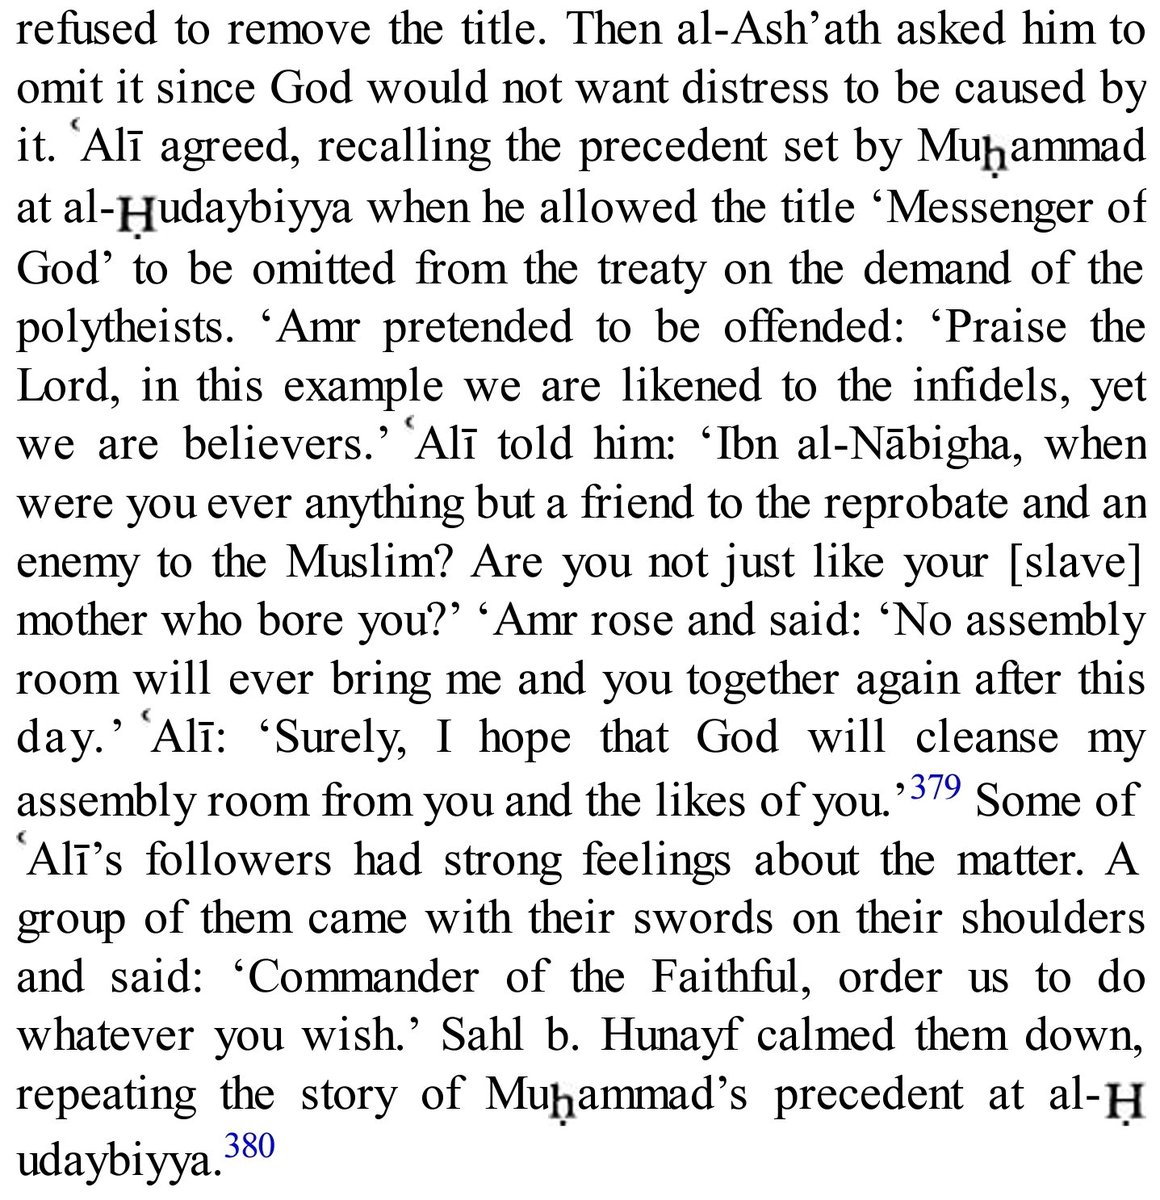 Amr ibn Ãs (la) just recently ran away from the sword of Imam Ali (AS) in the war, and failing to be quick in expressing his retreat he took off his clothes in a frenzy. Yet, he DARES show attitude like he's not a coward? His shamelessness truly knows no bounds.